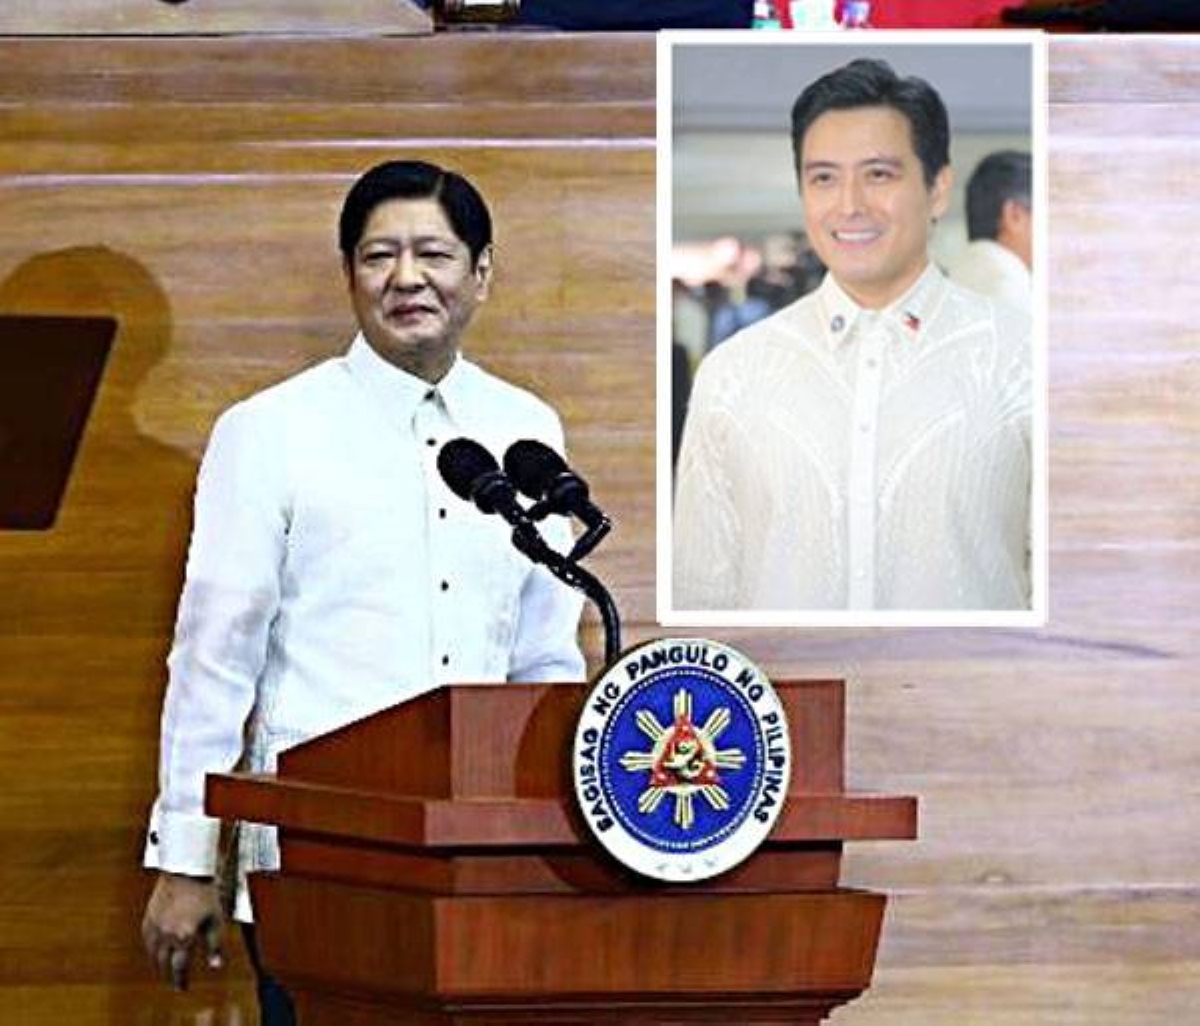 PBBM AND ALFRED VARGAS Best in barong. Besides the man of the hour, of course, President Bongbong Marcos, who wears the nation’s esteemed Barong Tagalog like a leader should – tailor-fit with sans a crease and with dignity and pride – The Manila Times Lifestyle nominates Quezon City 5th District Councilor Alfred Vargas as a close second for (remove this Best in Barong) in his pristine Francis Libiran, classic-cut trousers and Marikina- made footwear by Bucroe Shoes.PHOTO BY MIKE ALQUINTO, INSTAGRAM PHOTO/ALFREDVARGAS